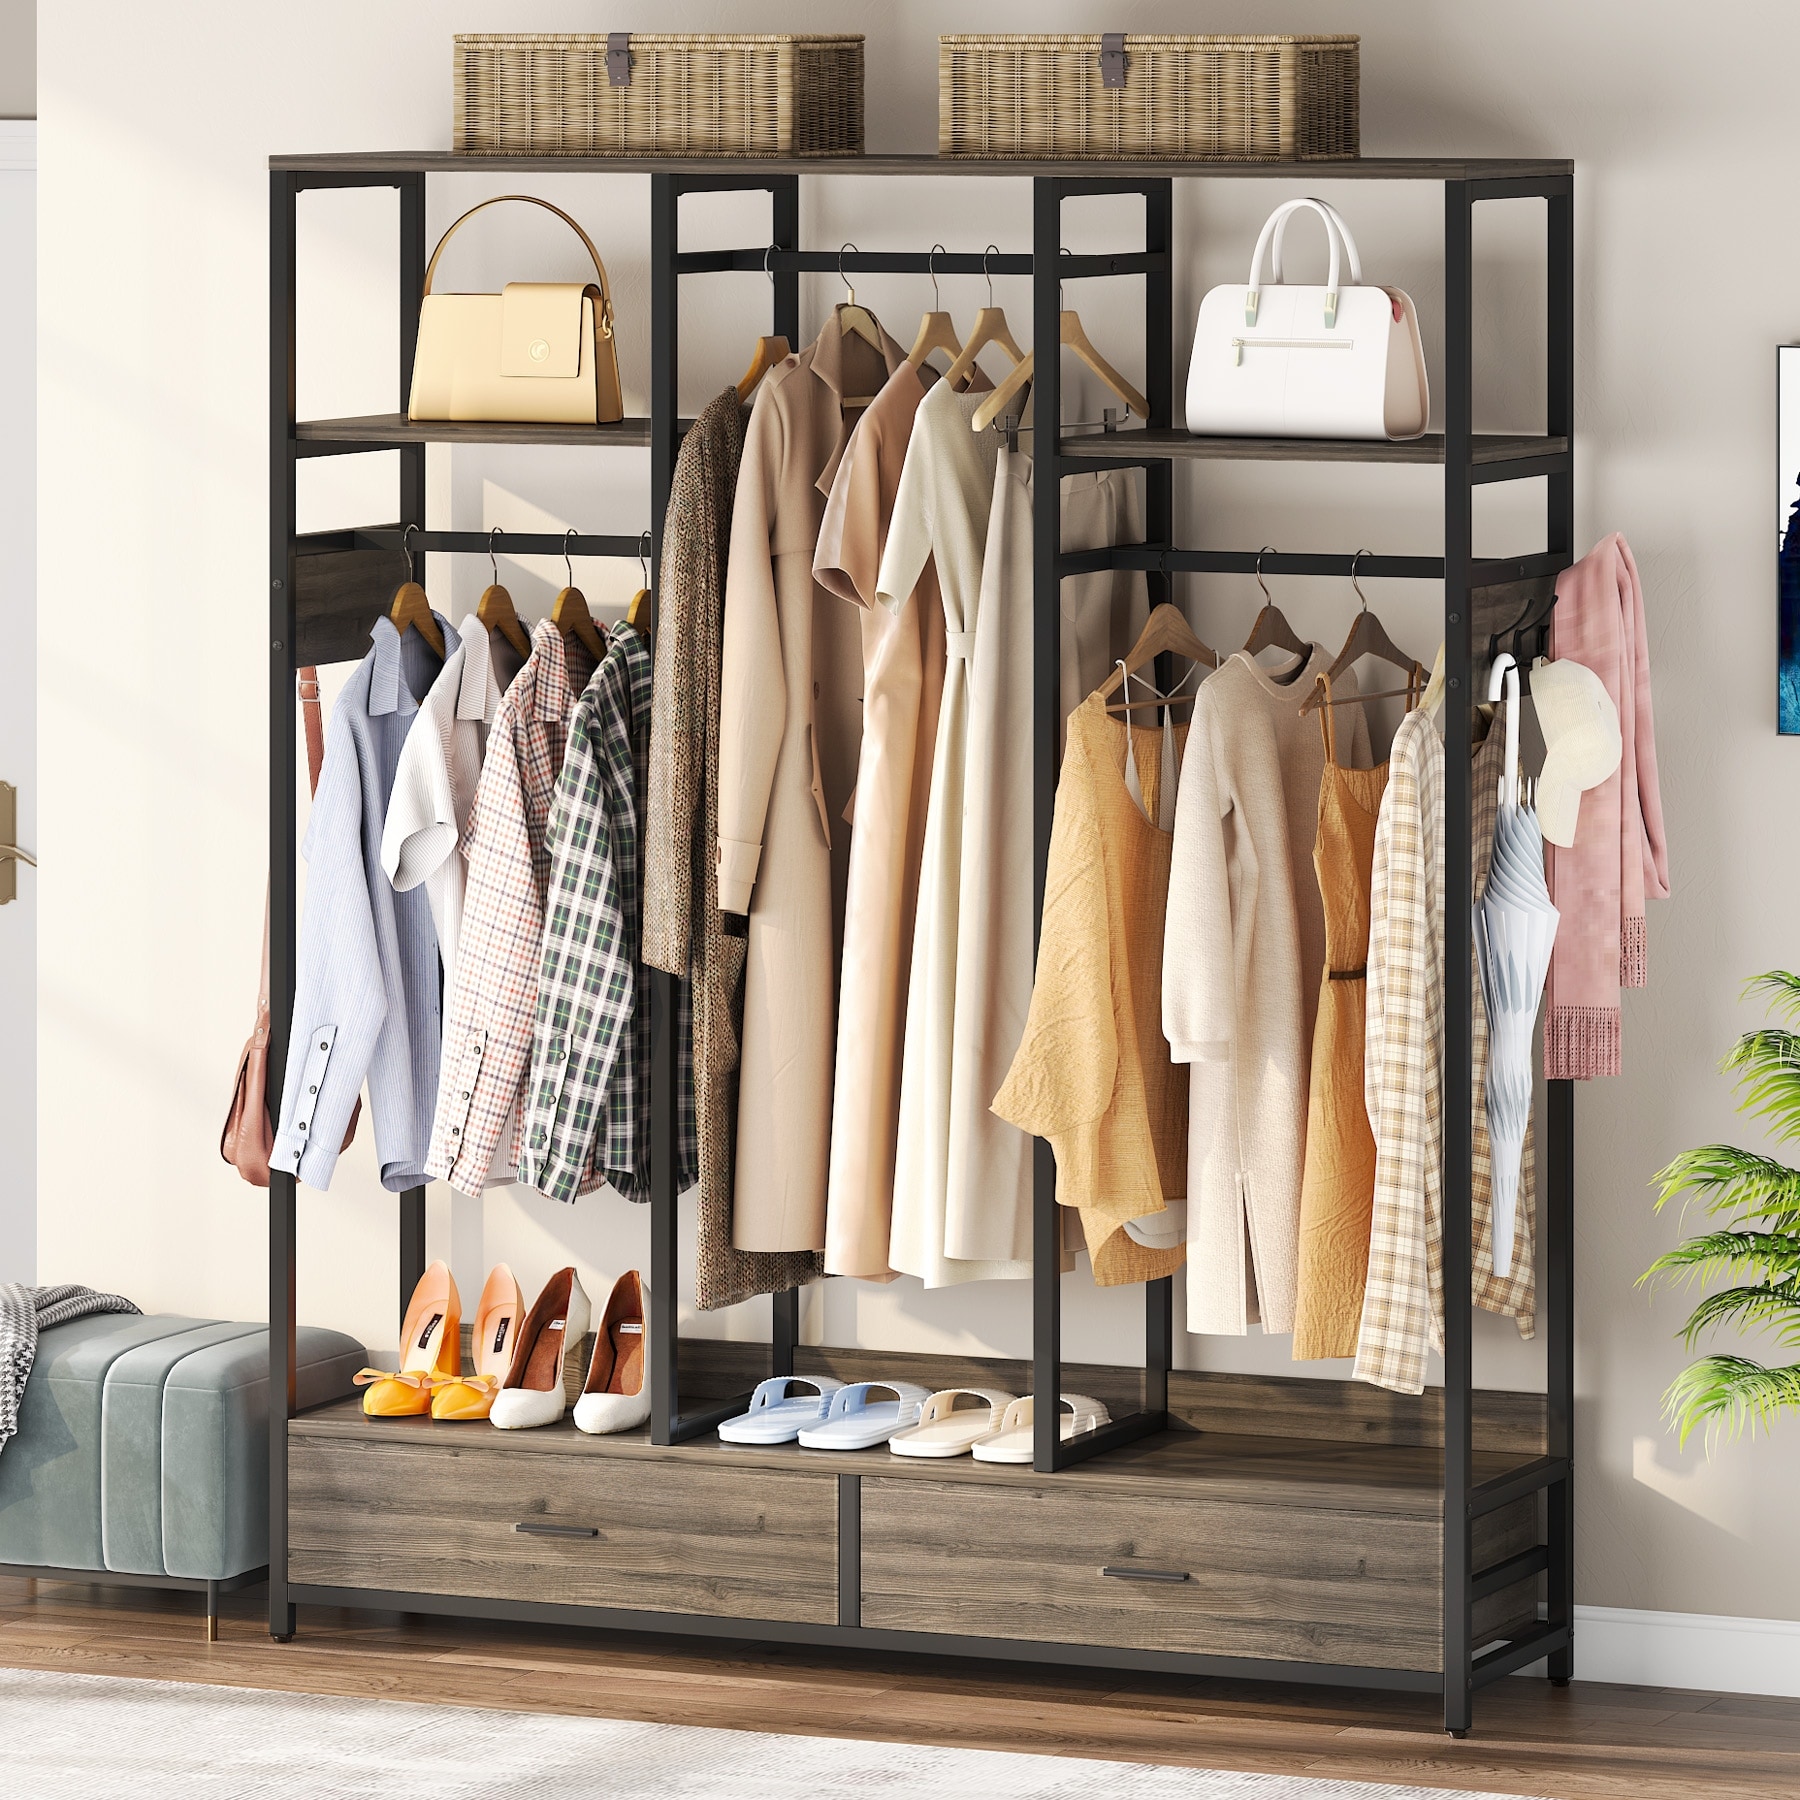 https://ak1.ostkcdn.com/images/products/is/images/direct/49a3e79aea183c29ecfb0274e4cbe44edc1c5191/Freestanding-Closet-Organizer-with-Drawers-and-Hanging-Rod-Clothes-Garment-Rack-Organizer.jpg